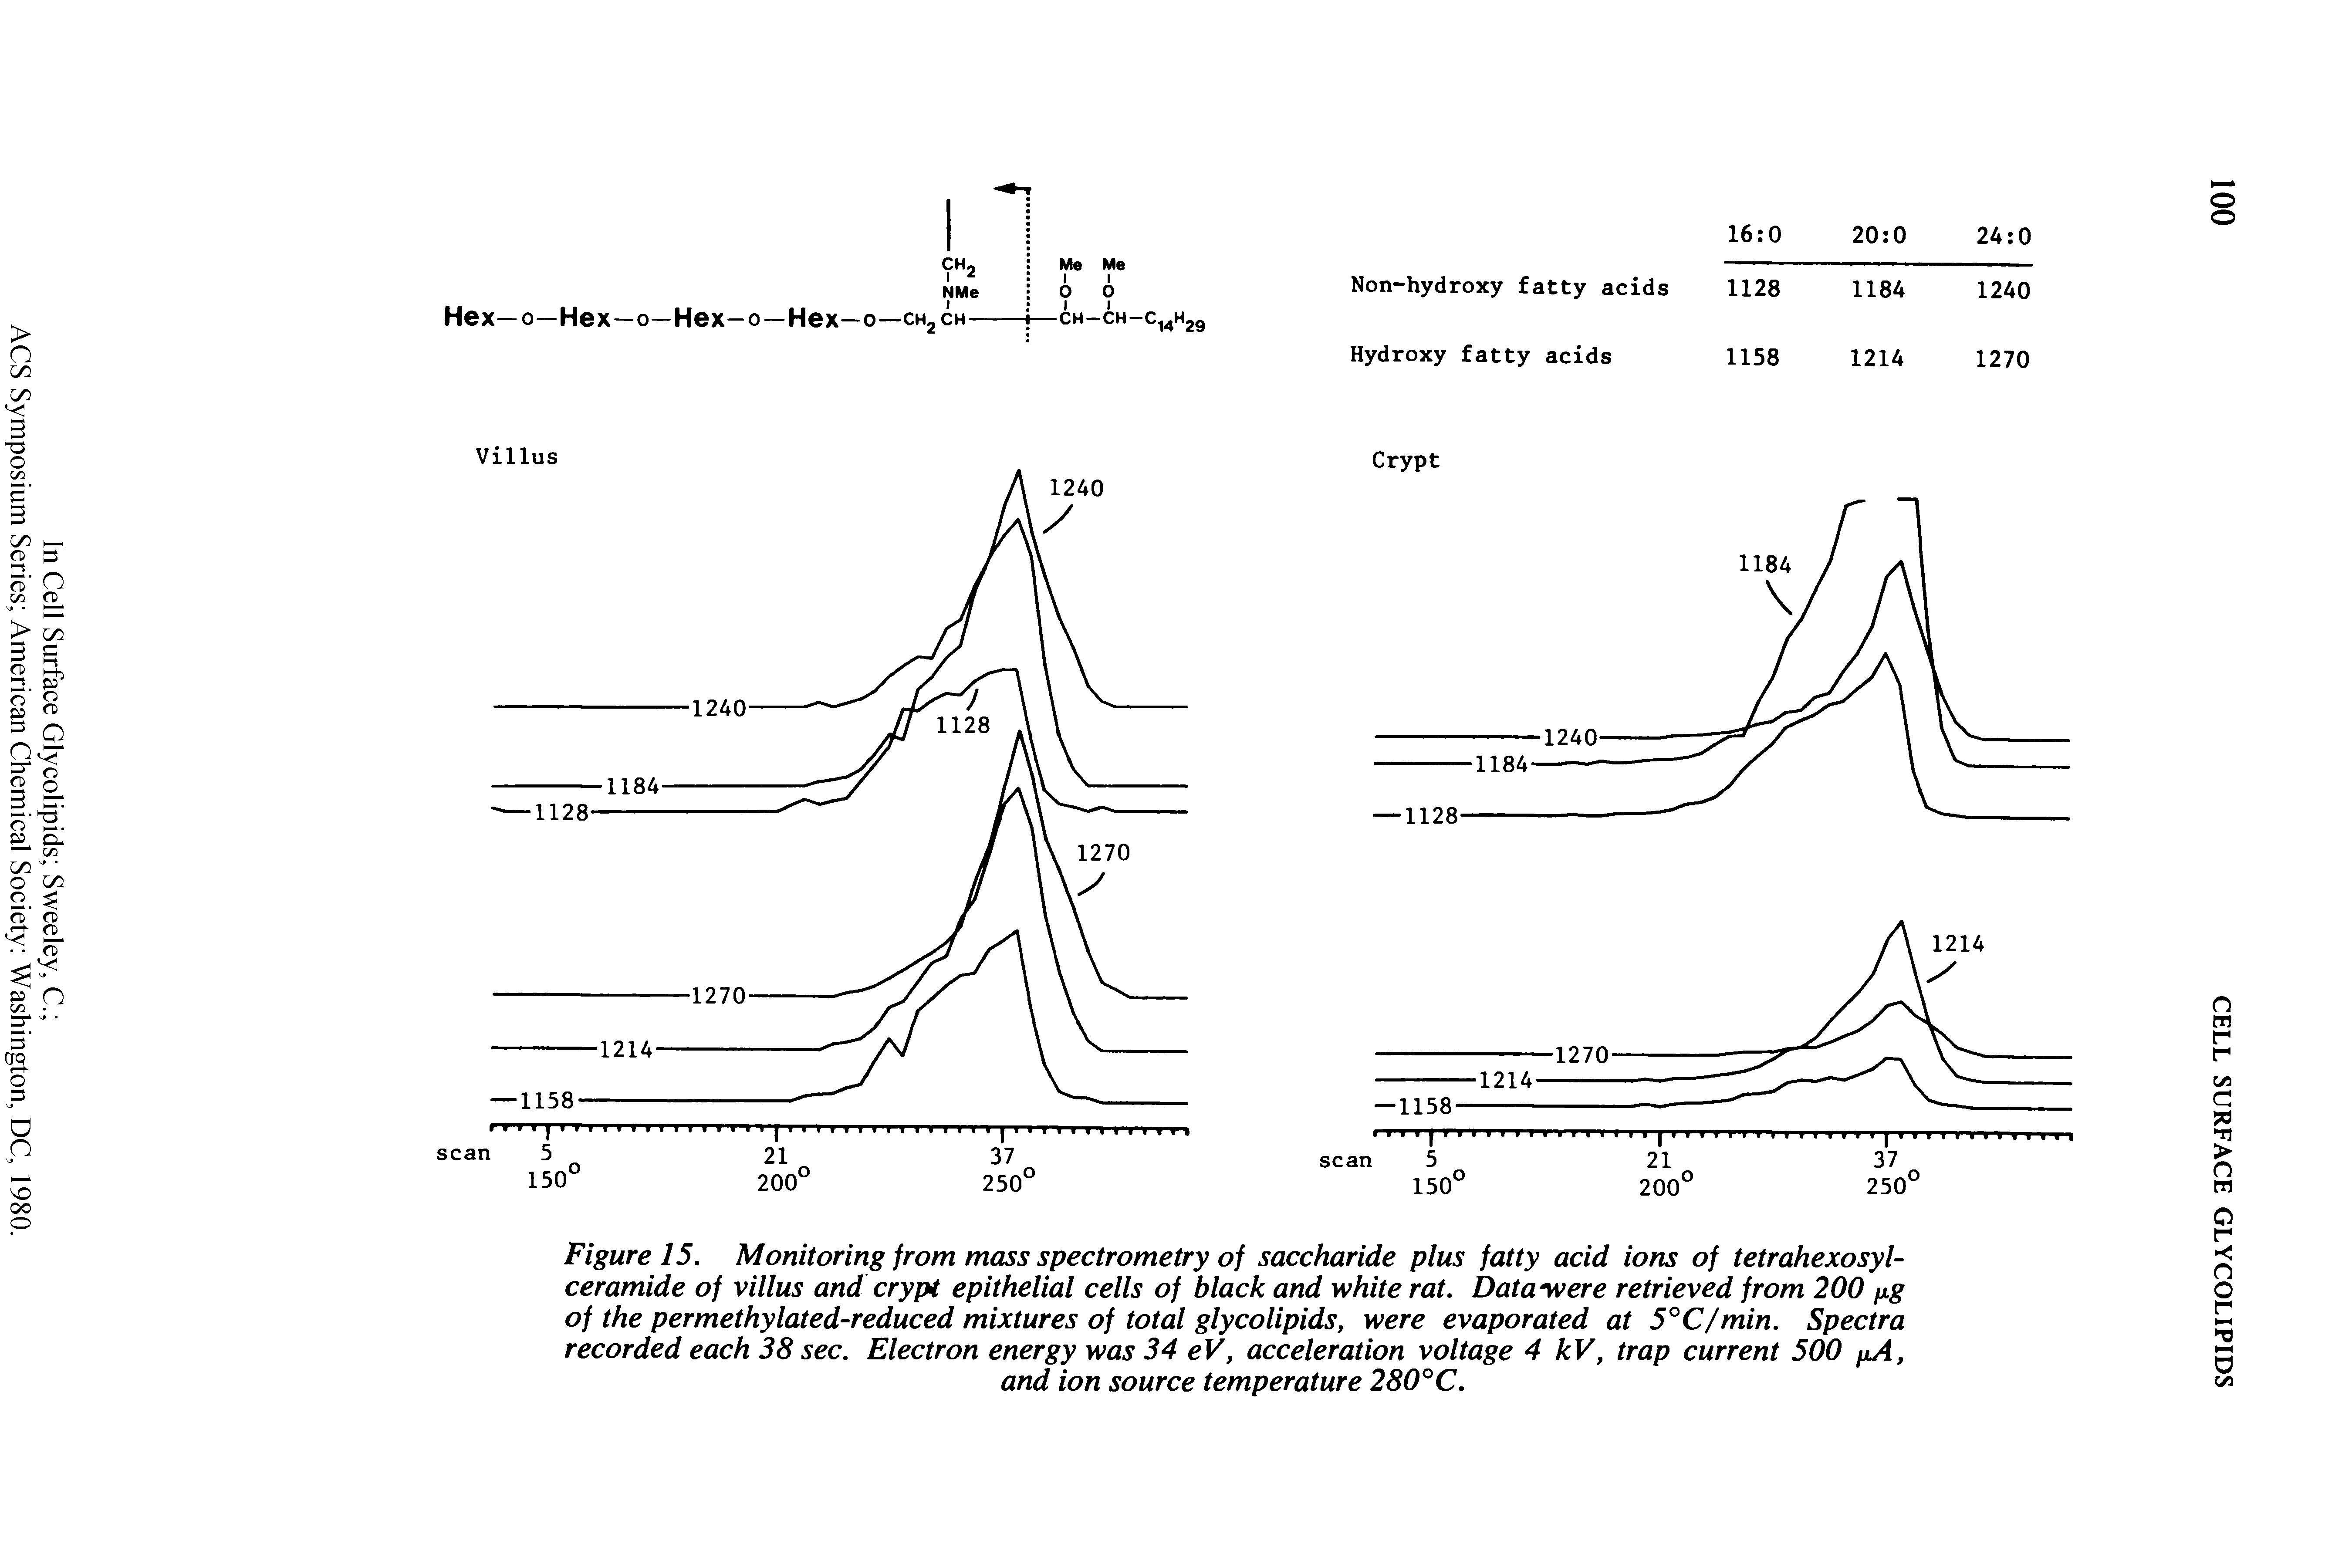 Figure 15. Monitoring from mass spectrometry of saccharide plus fatty acid ions of tetrahexosyl-ceramide of villus and crypt epithelial cells of black and white rat. Data were retrieved from 200 fxg of the permethylated-reduced mixtures of total glycolipids, were evaporated at 5°C/min. Spectra recorded each 38 sec. Electron energy was 34 eV, acceleration voltage 4 kV, trap current 500 /jA,...